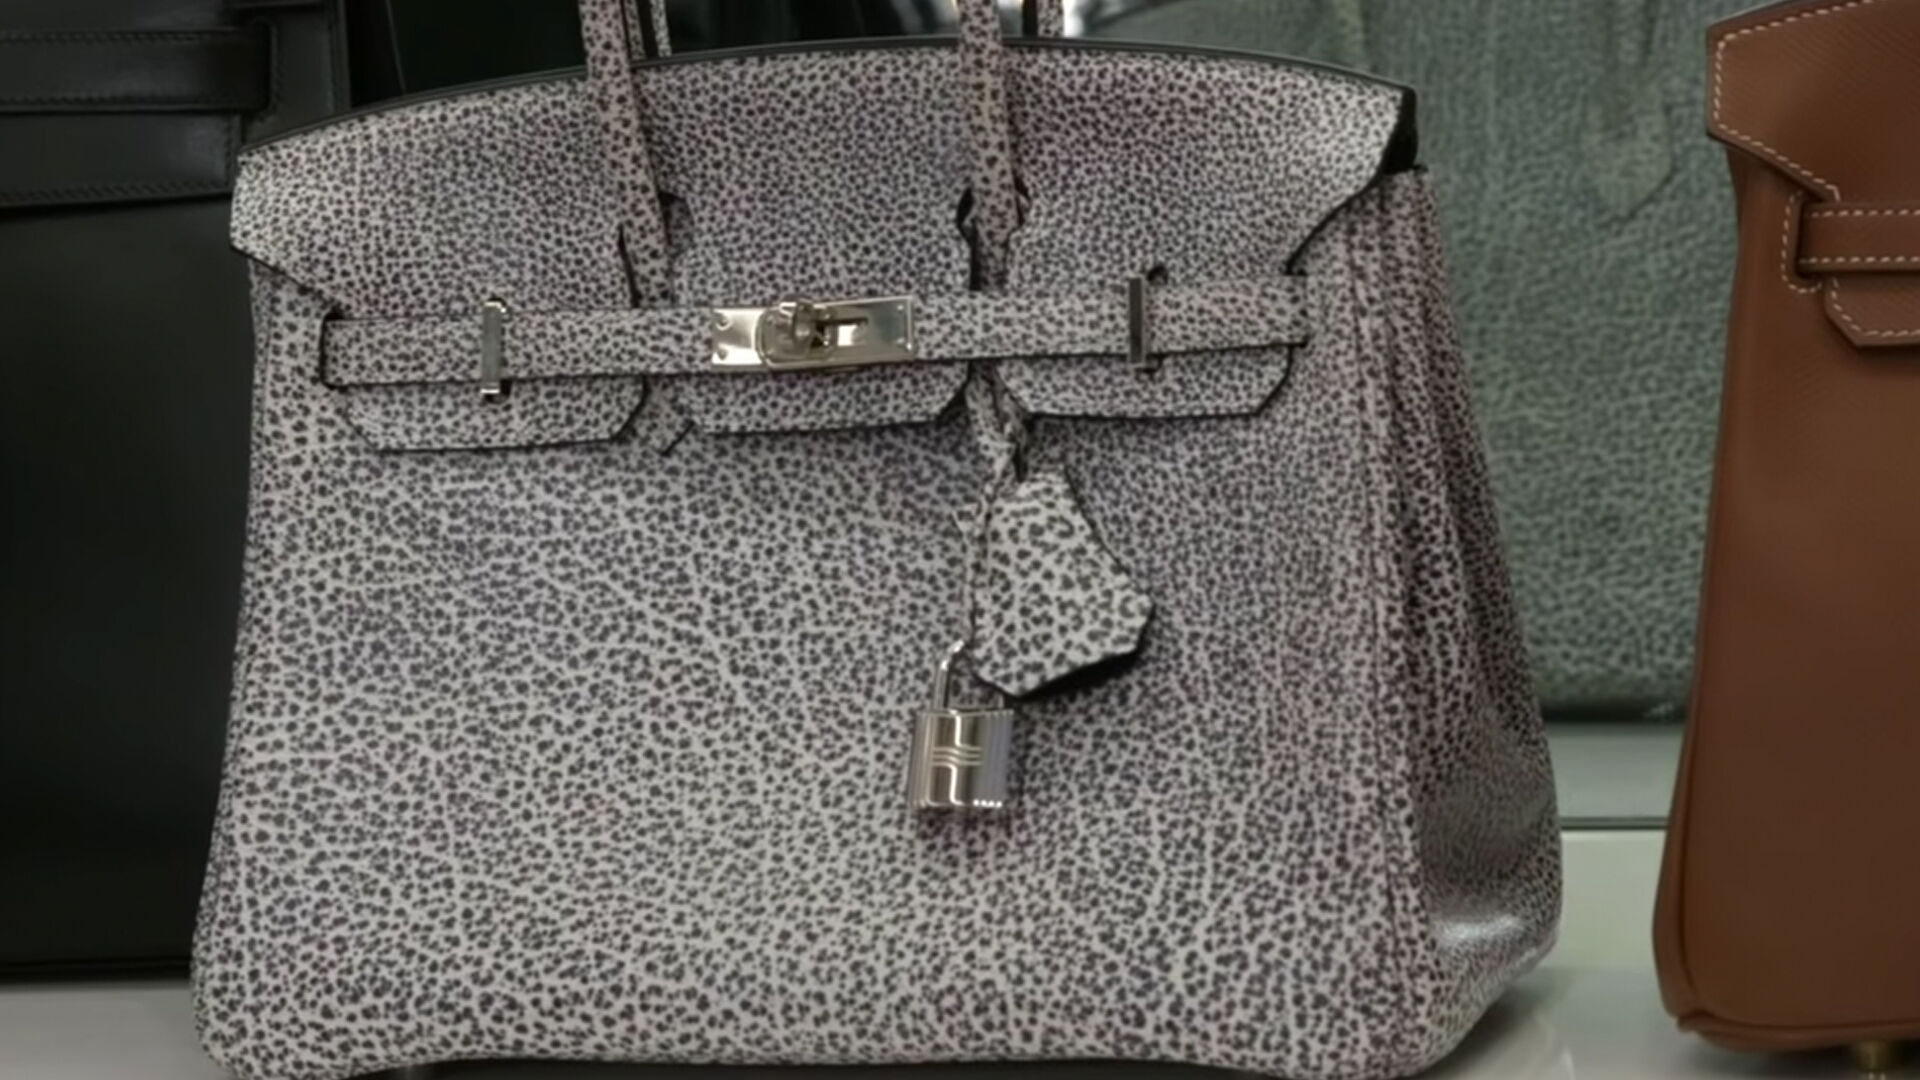 Kris Jenner Has a Whole Closet Just for Her Birkin Bags: Photo